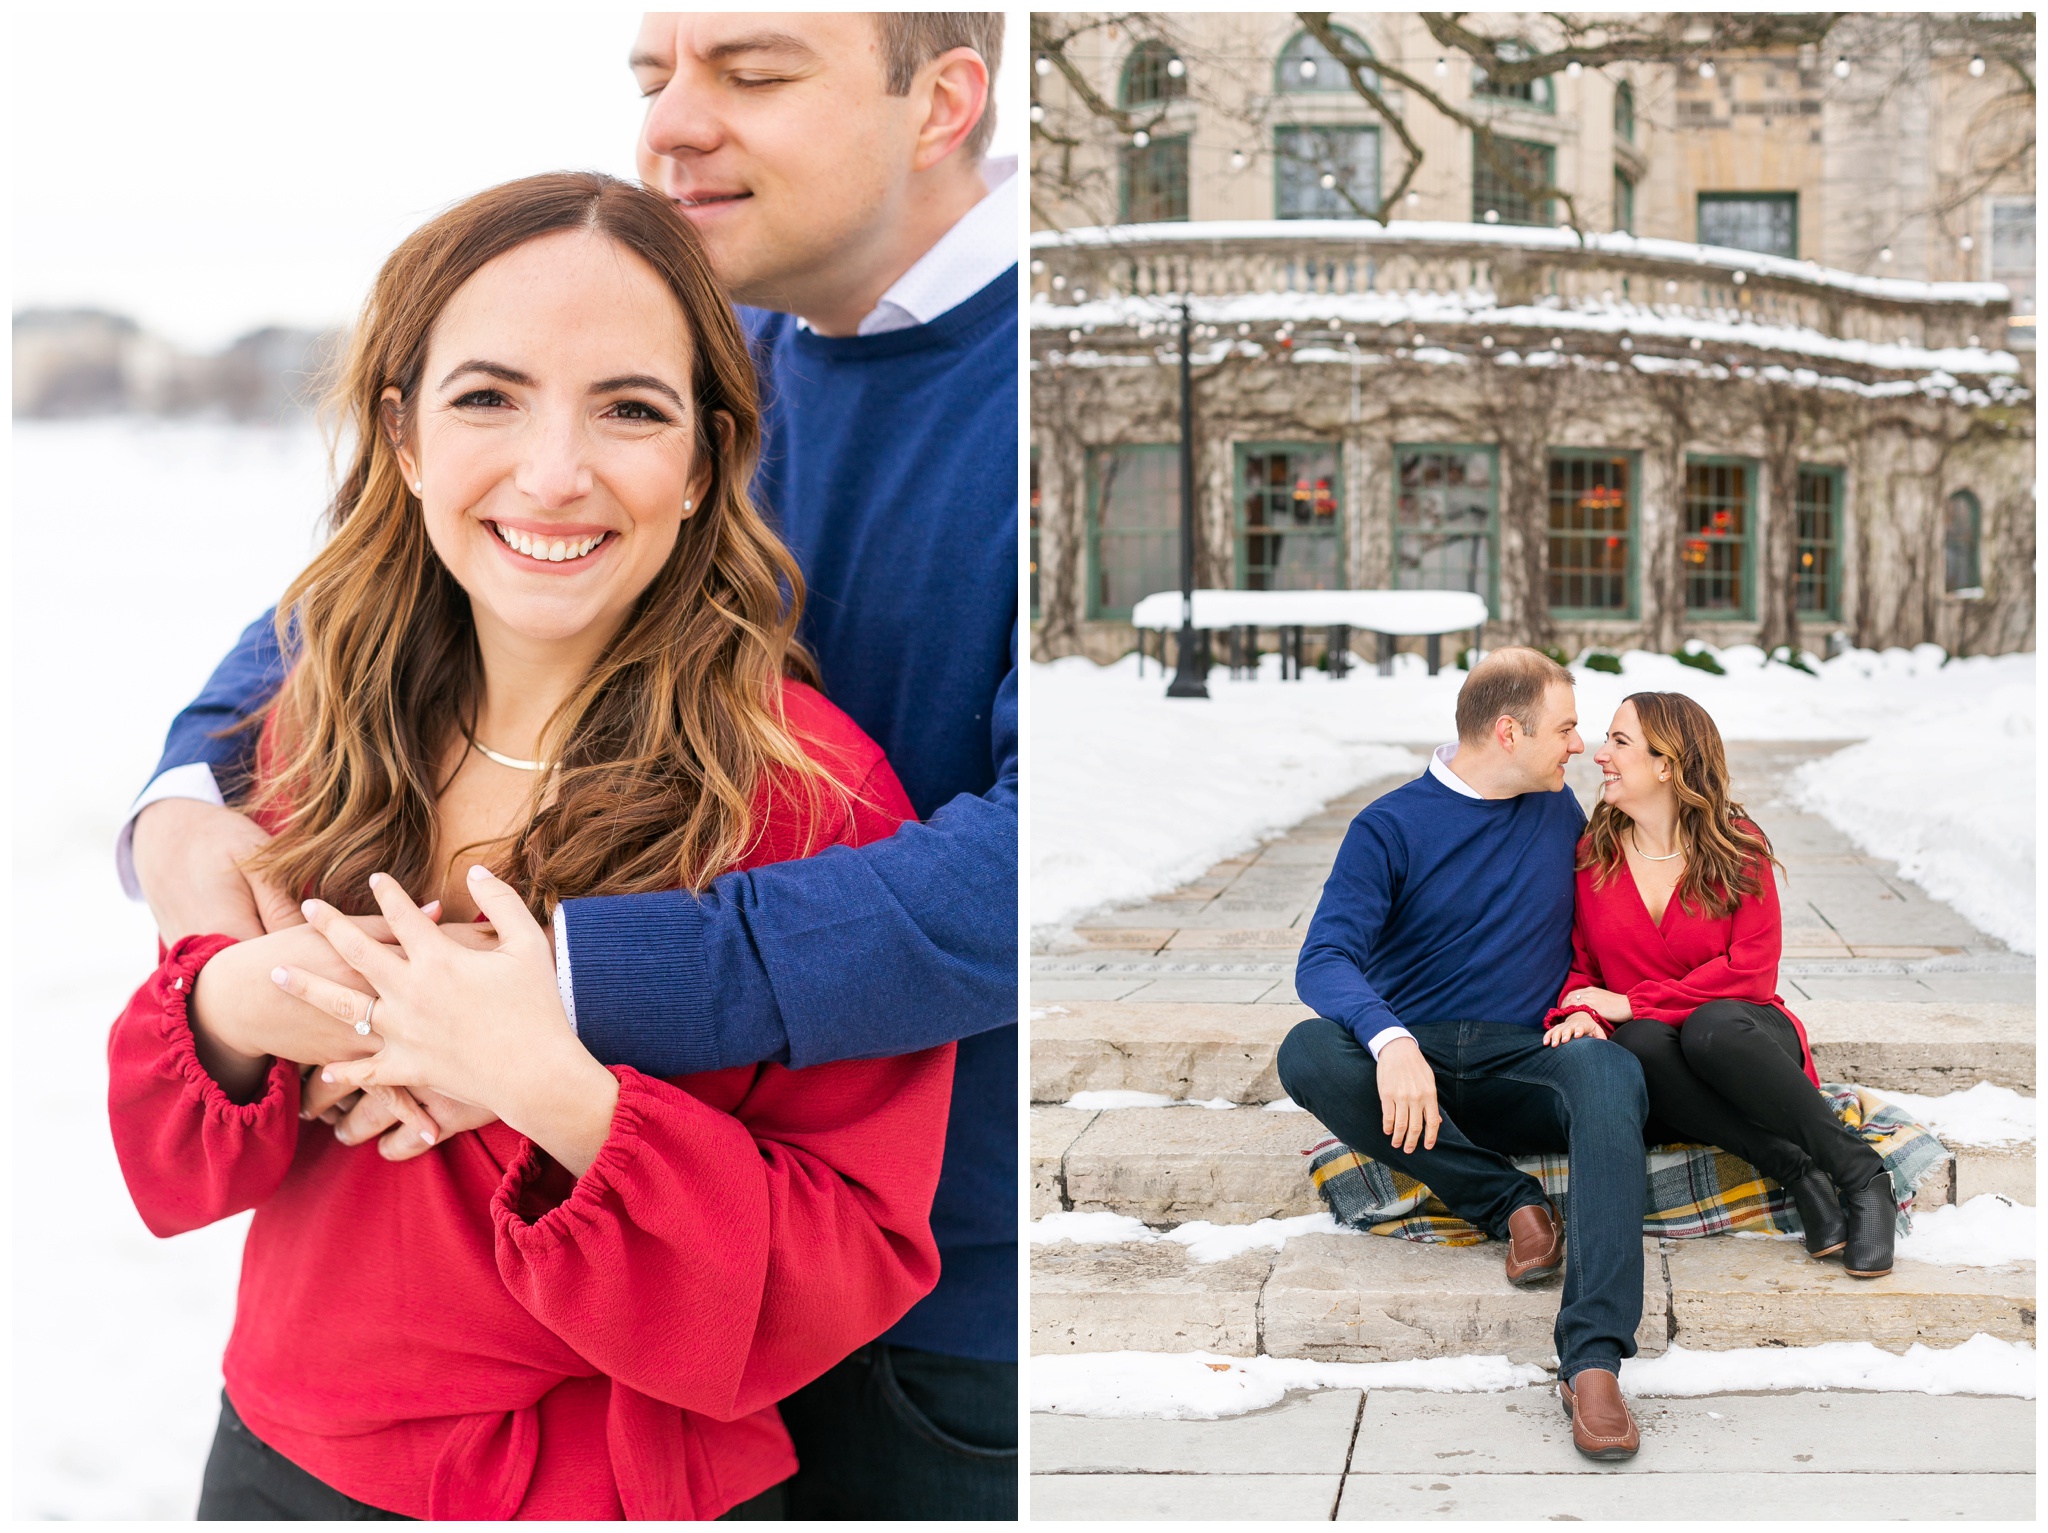 Memorial_Union_engagement_session_caynay_photo_2891.jpg